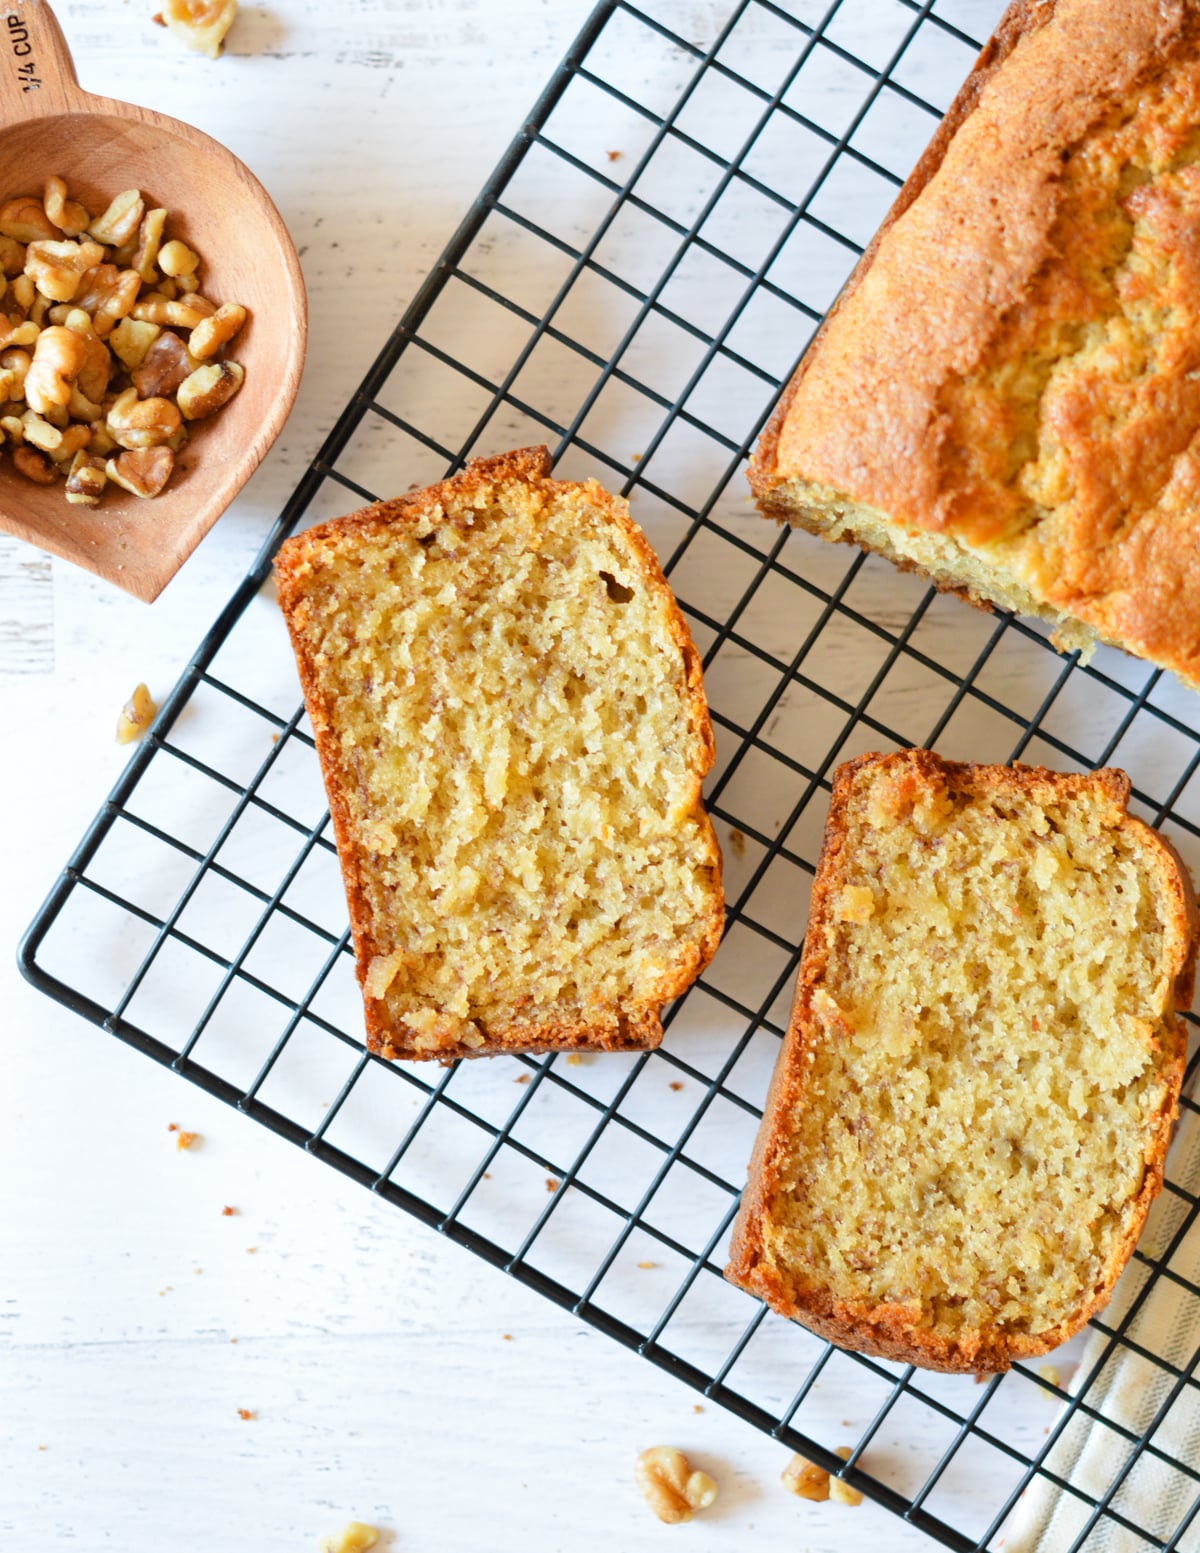 banana bread slices on a cooling rack.